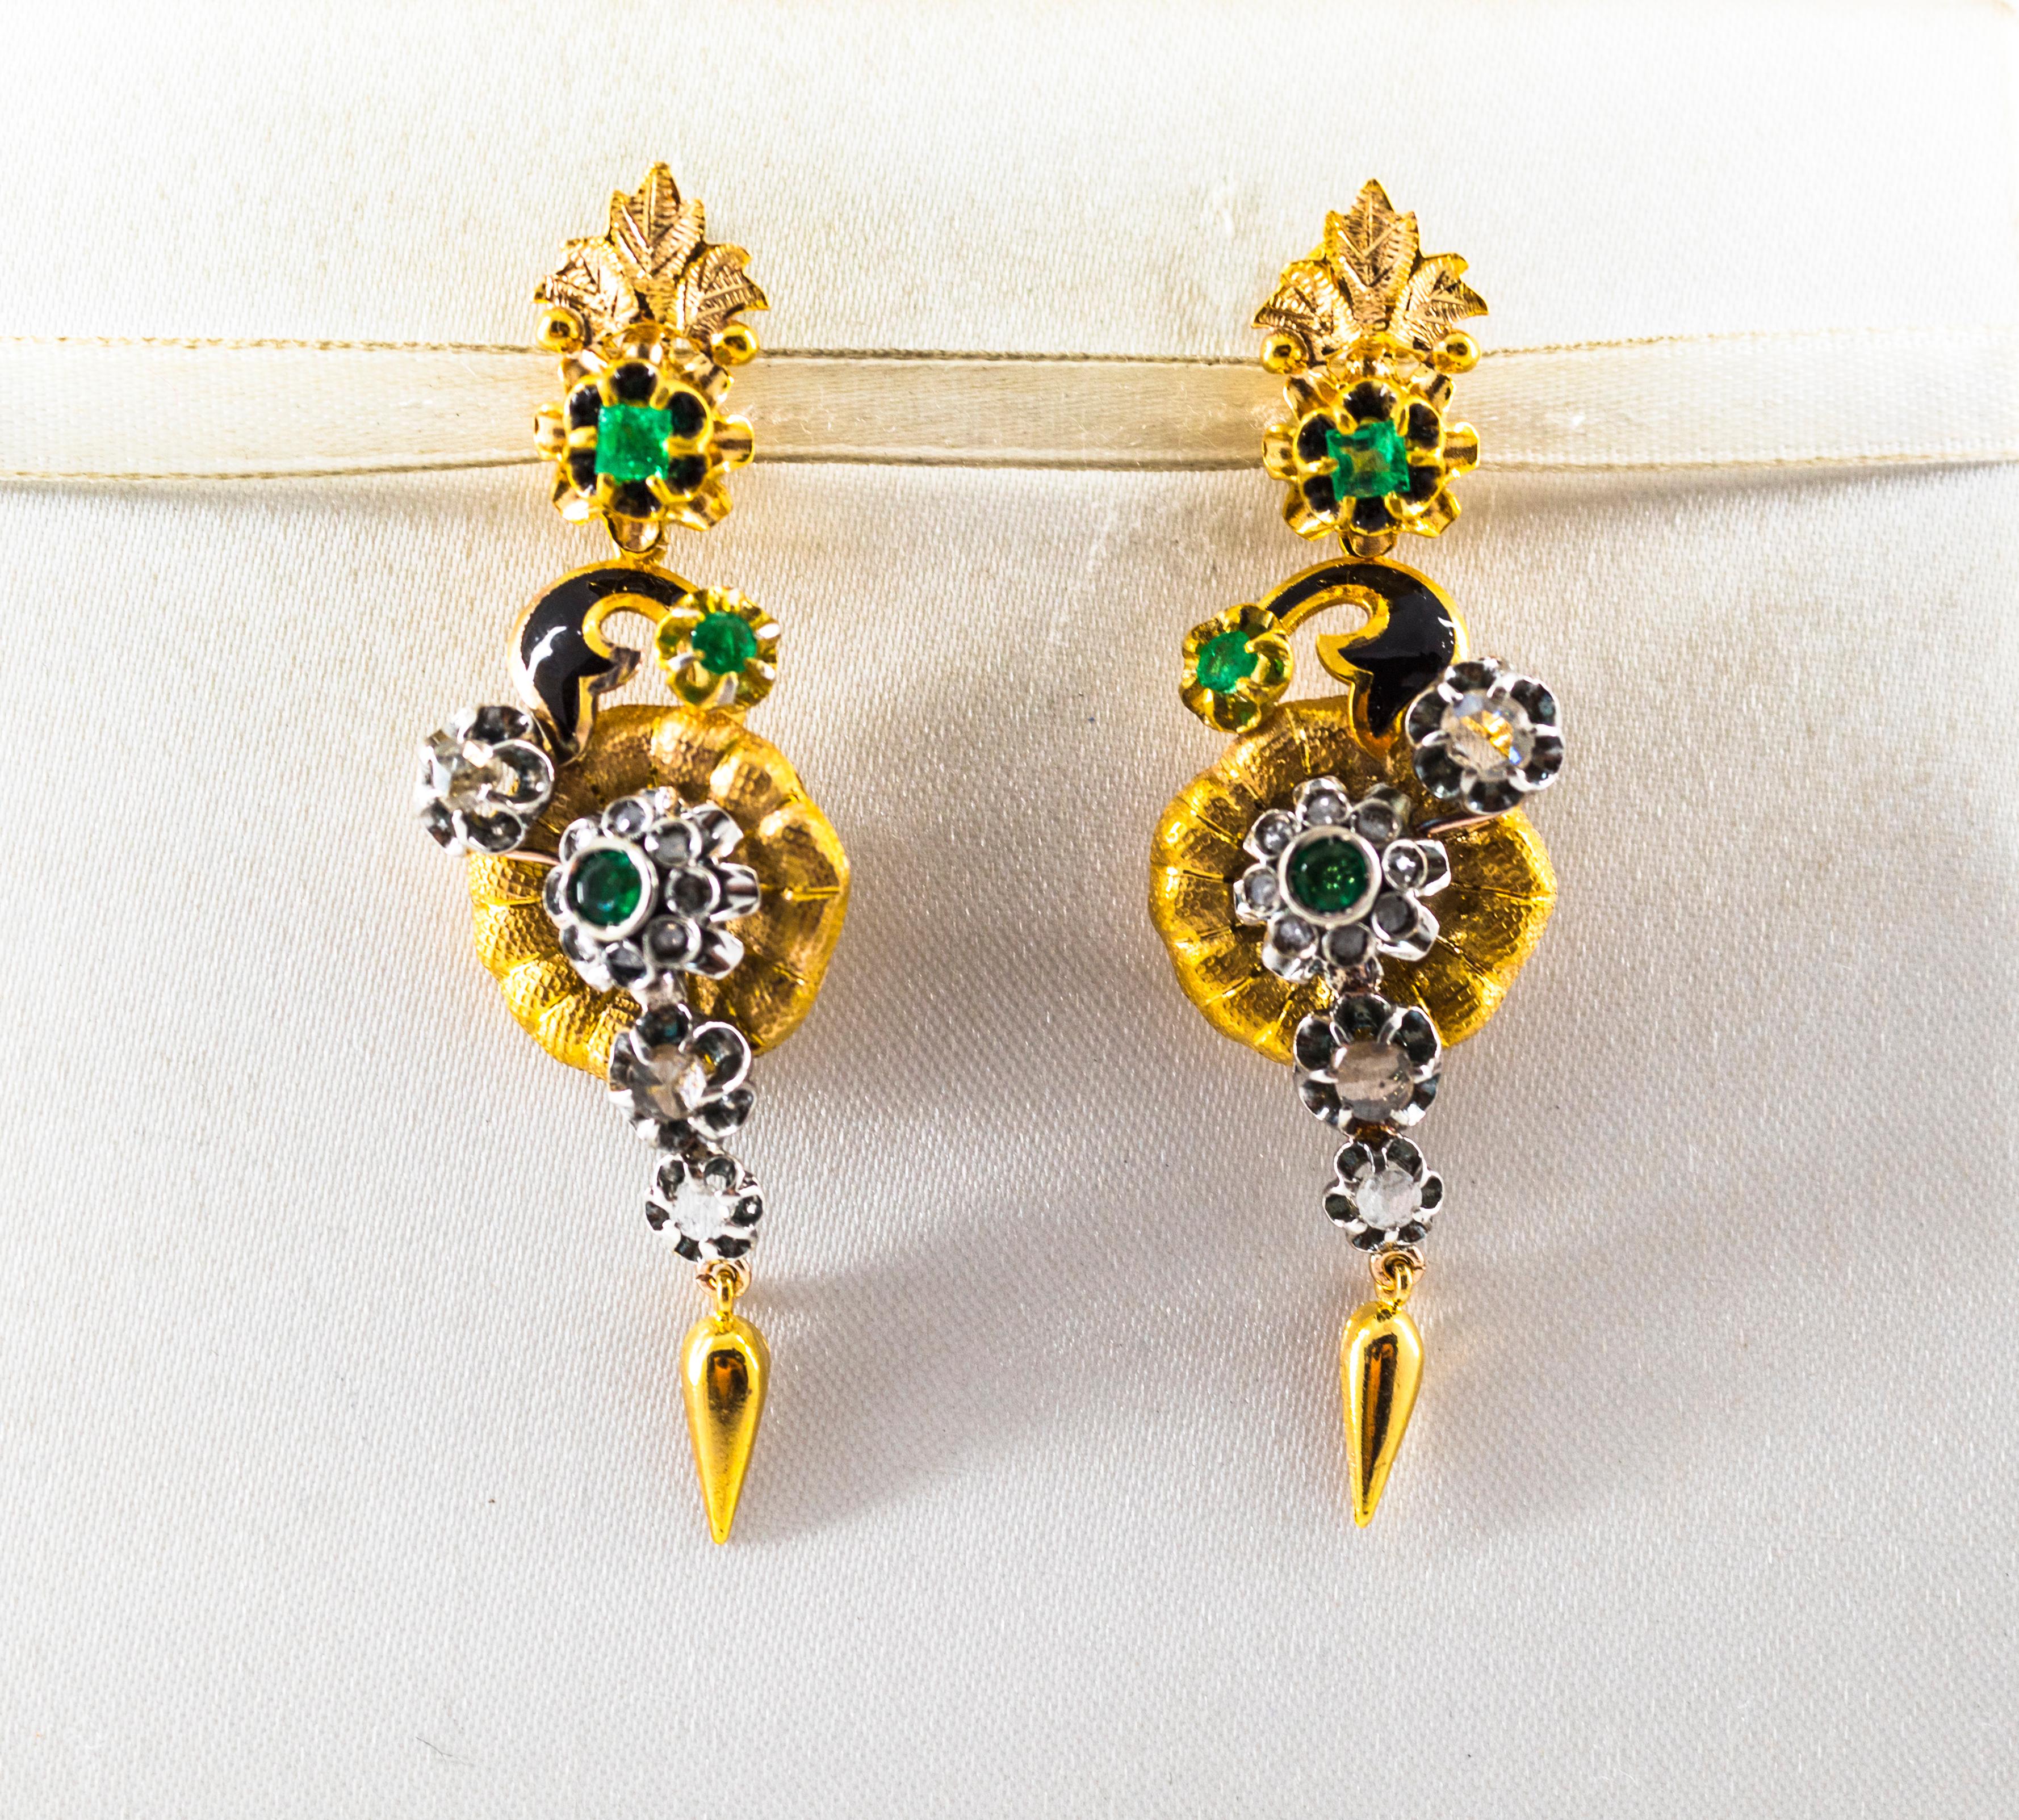 These Earrings are made of 9K Yellow Gold and Sterling Silver.
These Earrings have 1.10 Carats of White Rose Cut Diamonds.
These Earrings have 1.30 Carats of Emeralds.
These Earrings have also Black Enamel.
All our Earrings have pins for pierced